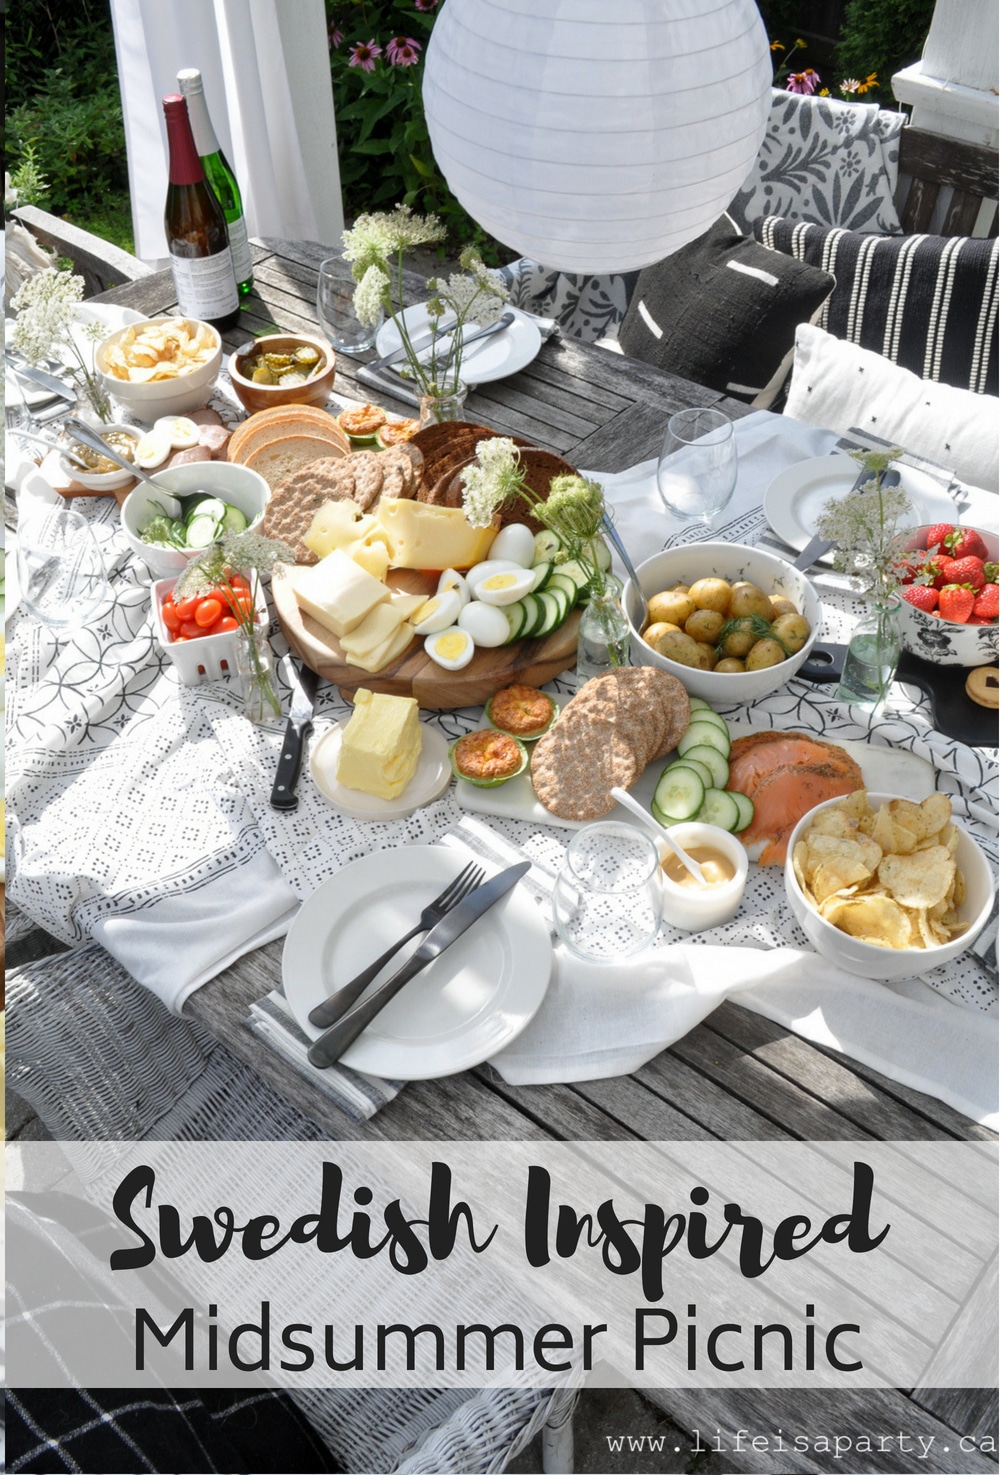 Swedish Inspired Midsummer Picnic:  Enjoy drinks, smorgasbord, and dessert all inspired by a traditional Swedish Midsummer party.